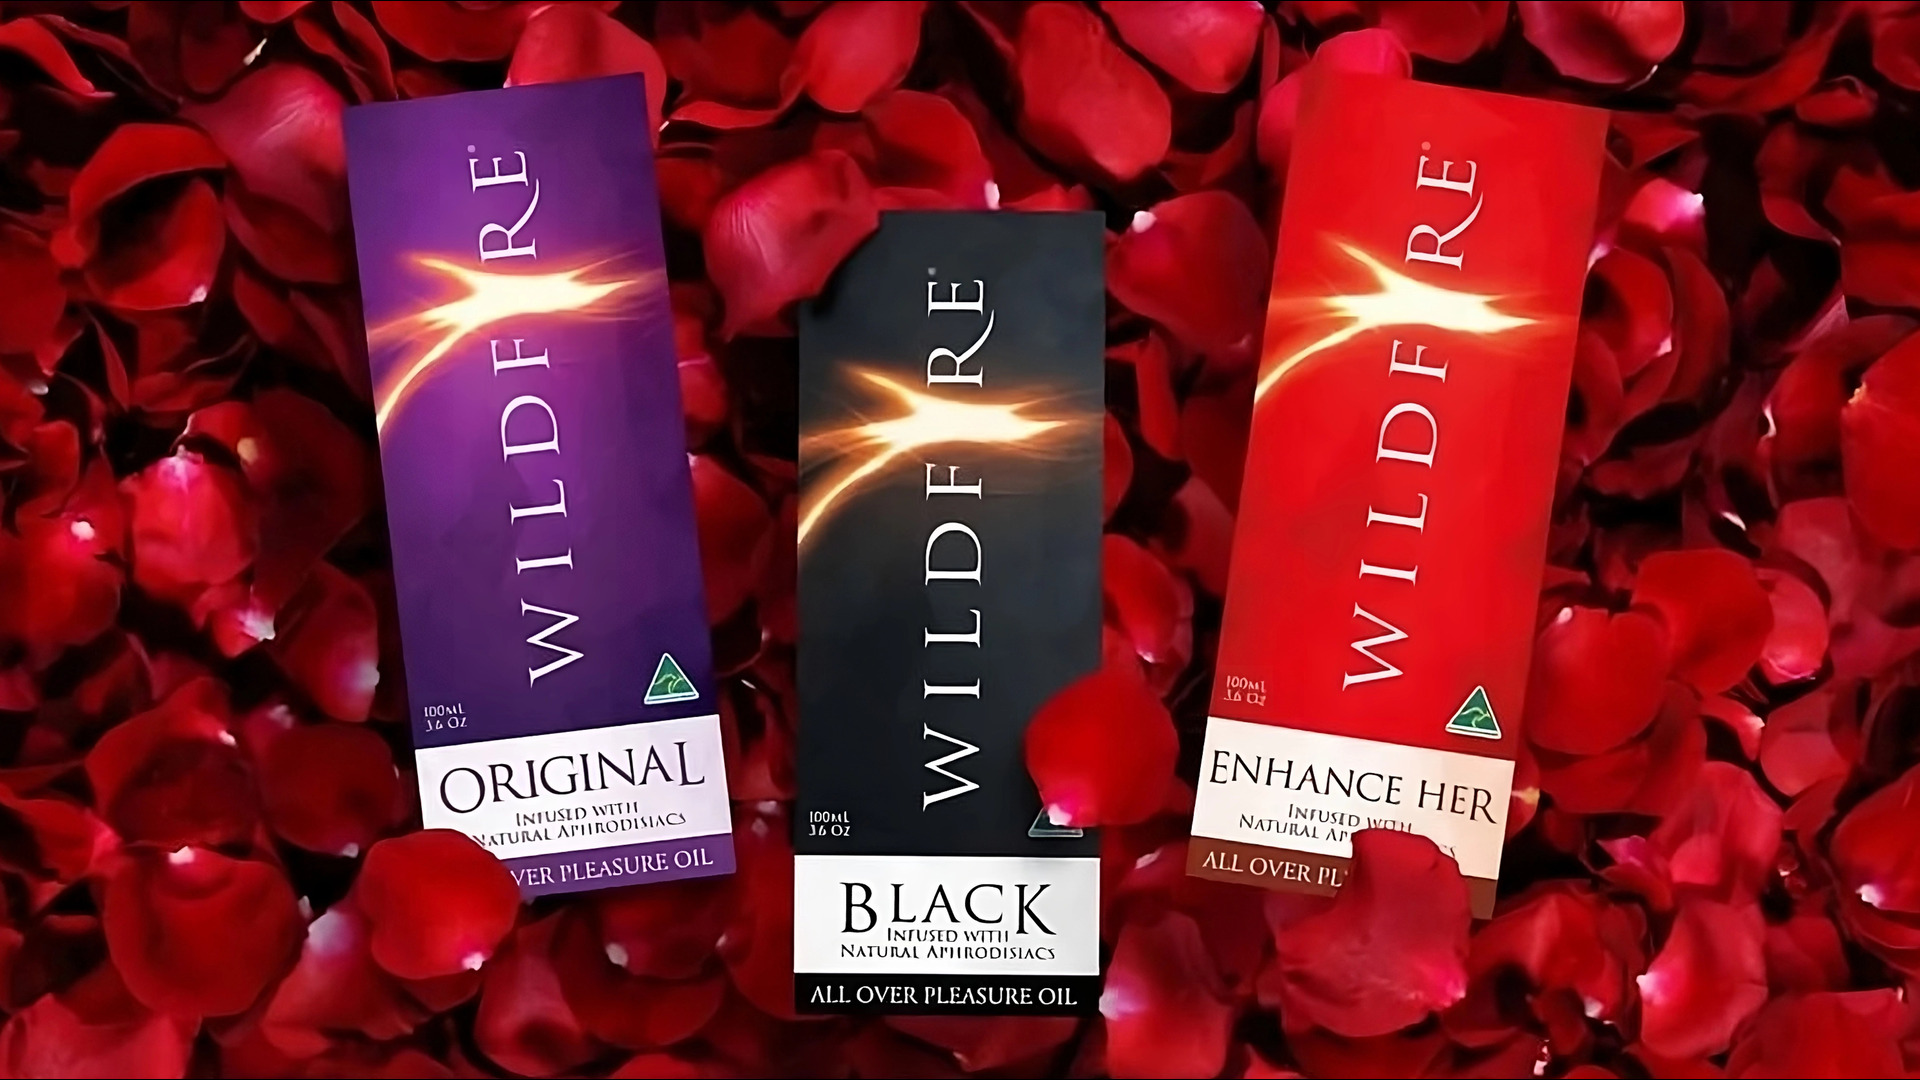 massage oil sexually with wildfire pleasure oil boxes on rose petals